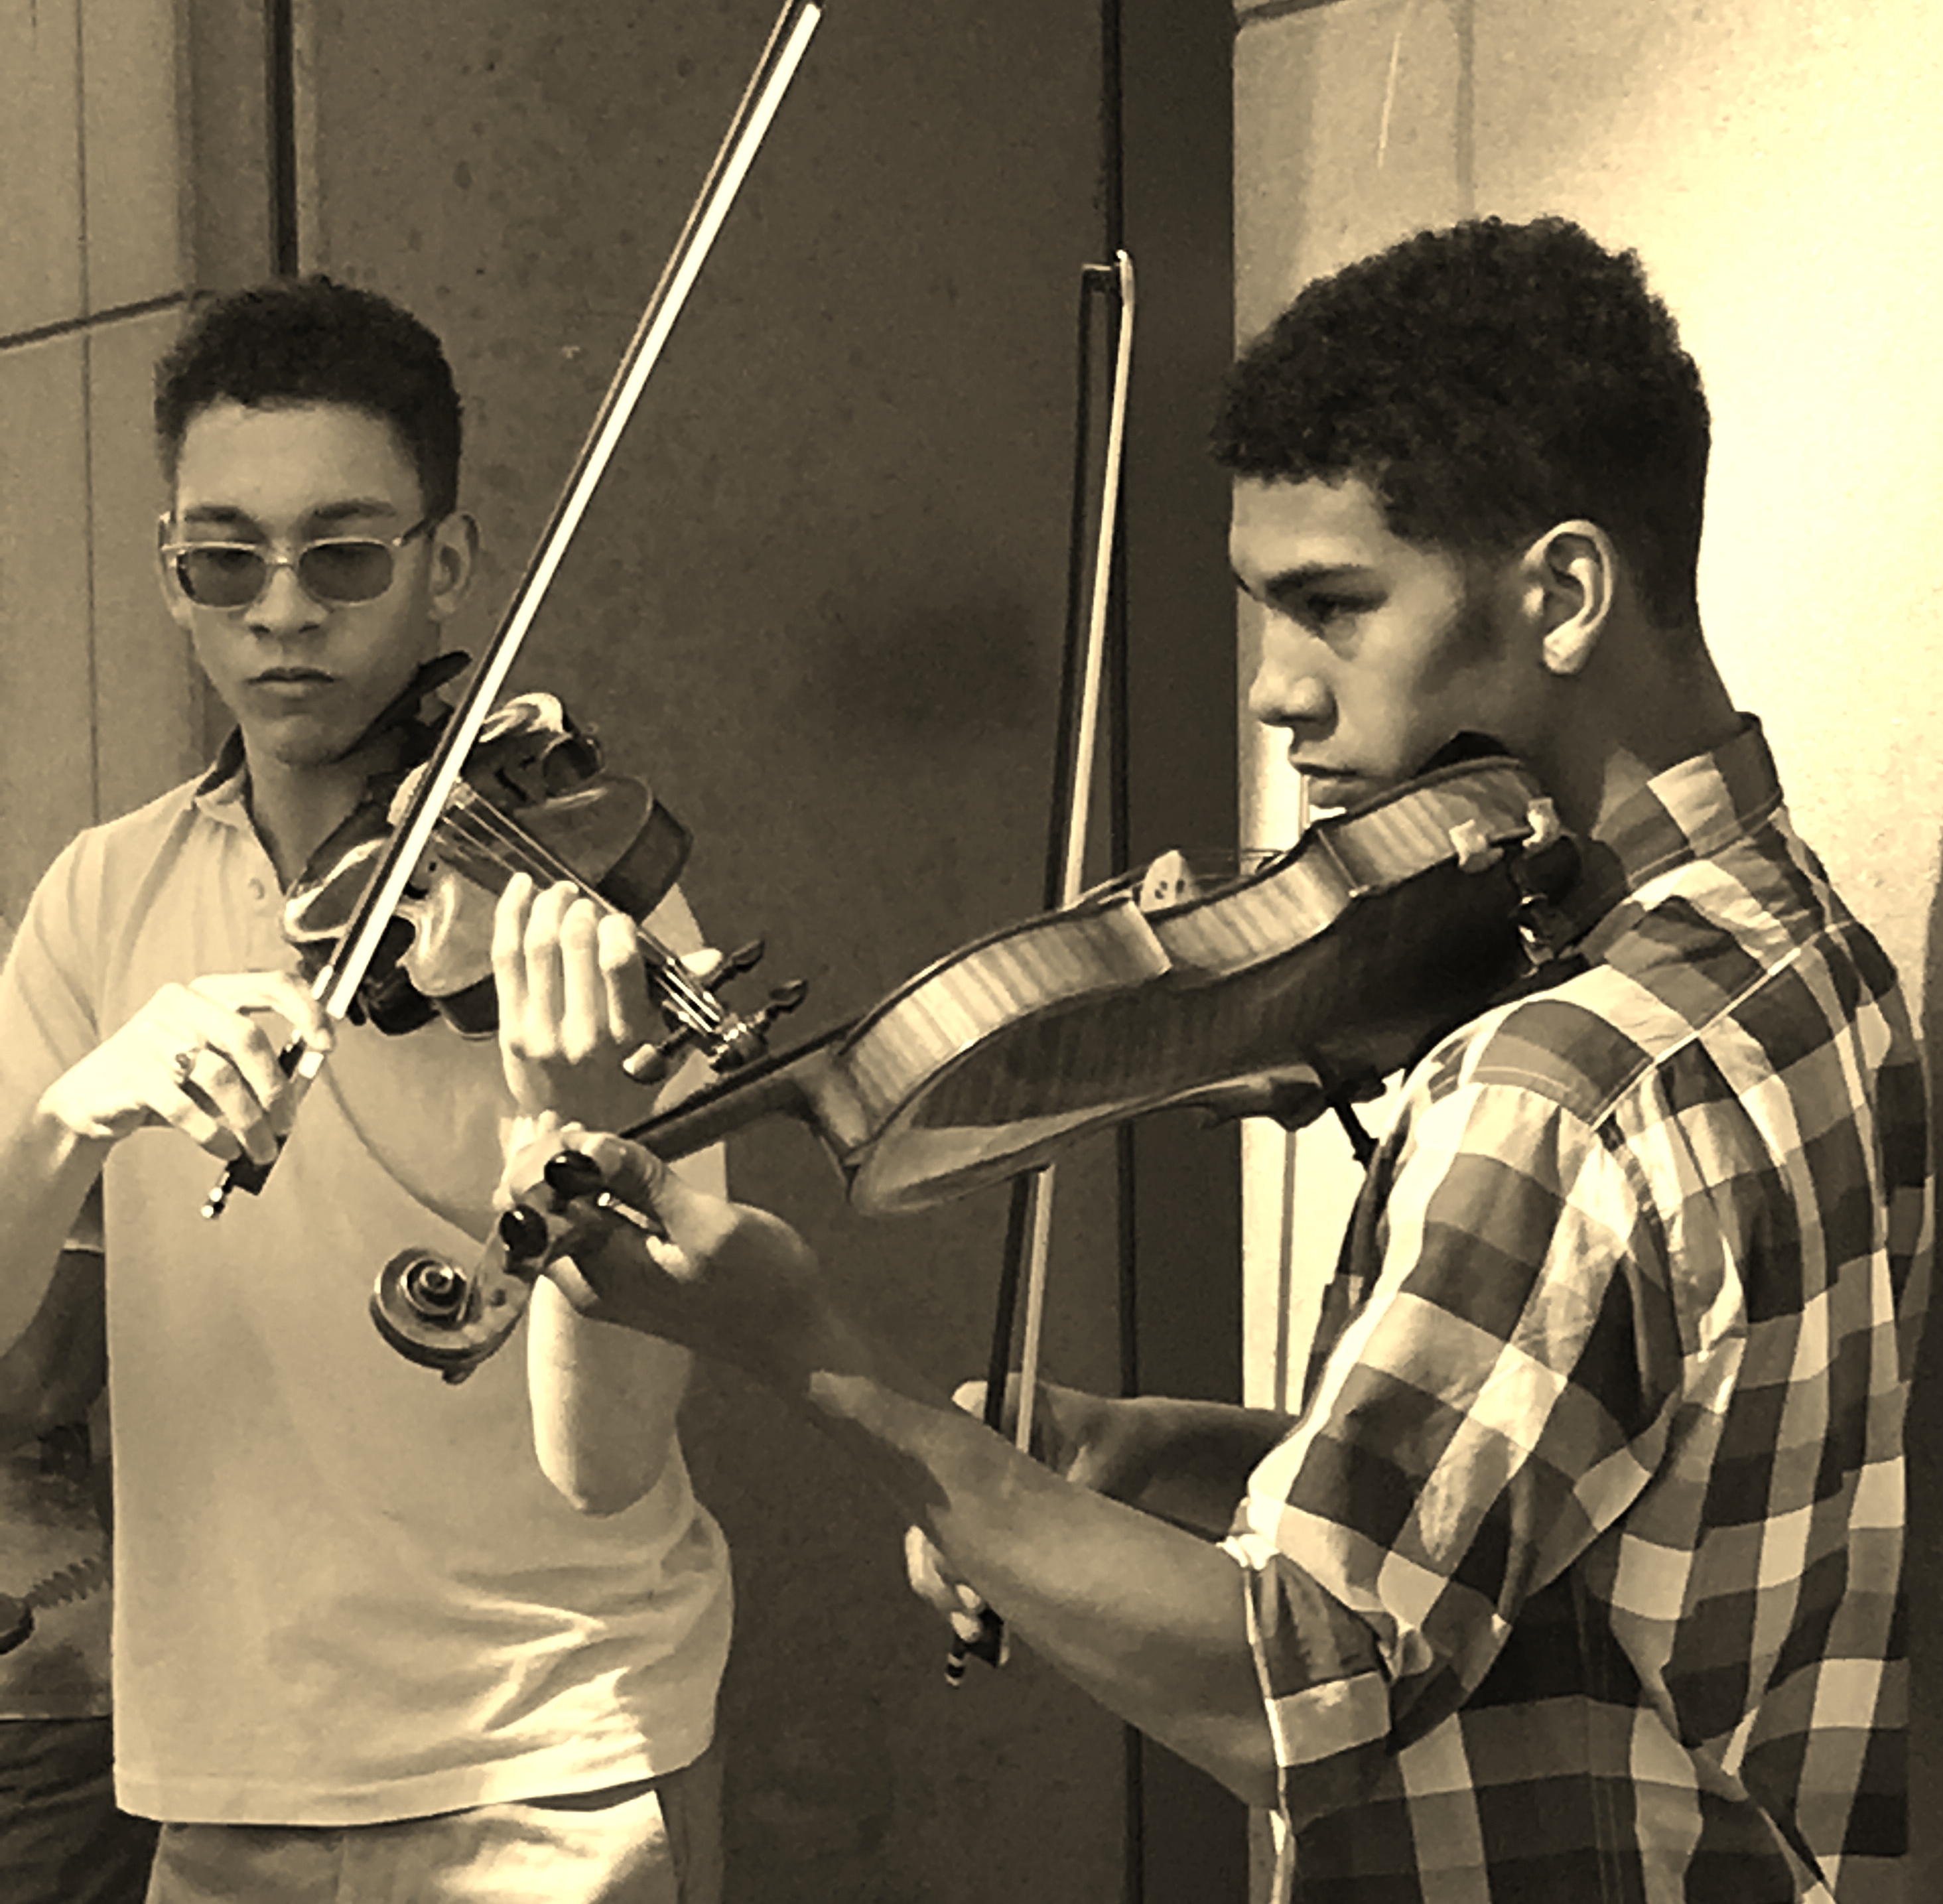 Two young men play their violins at Bunkerfest 2017.